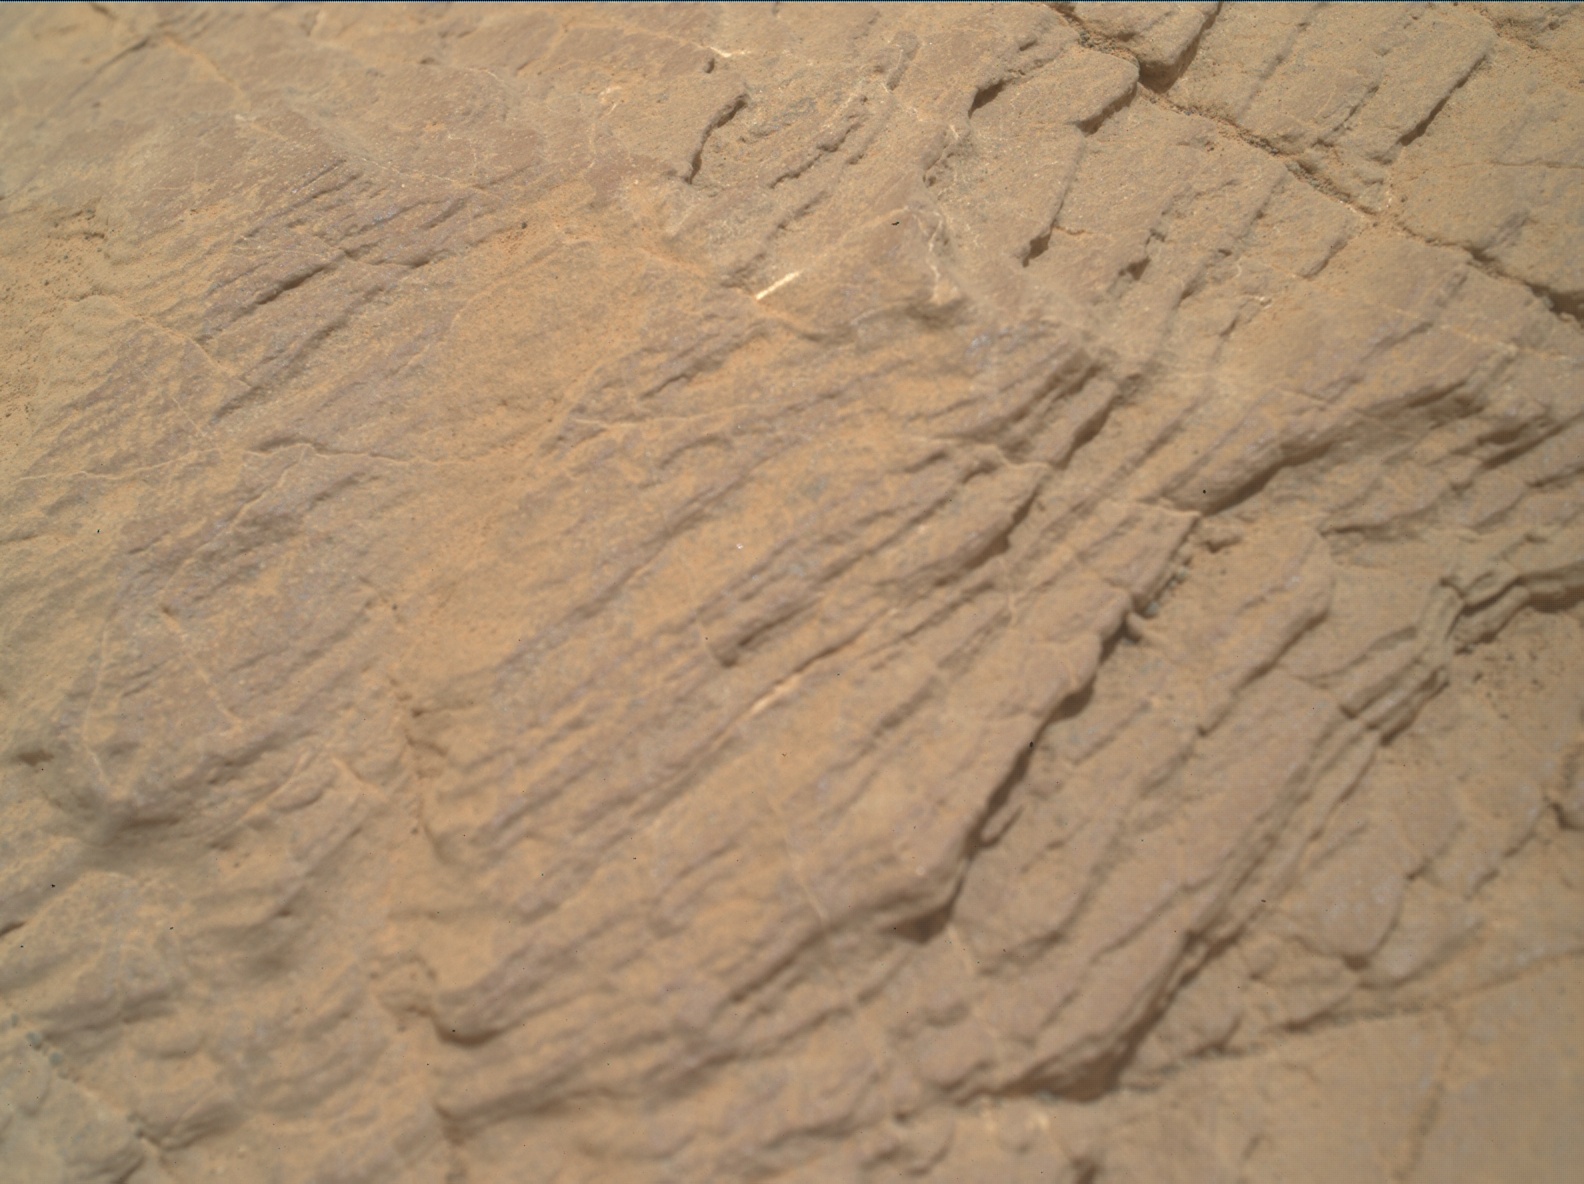 Nasa's Mars rover Curiosity acquired this image using its Mars Hand Lens Imager (MAHLI) on Sol 2320